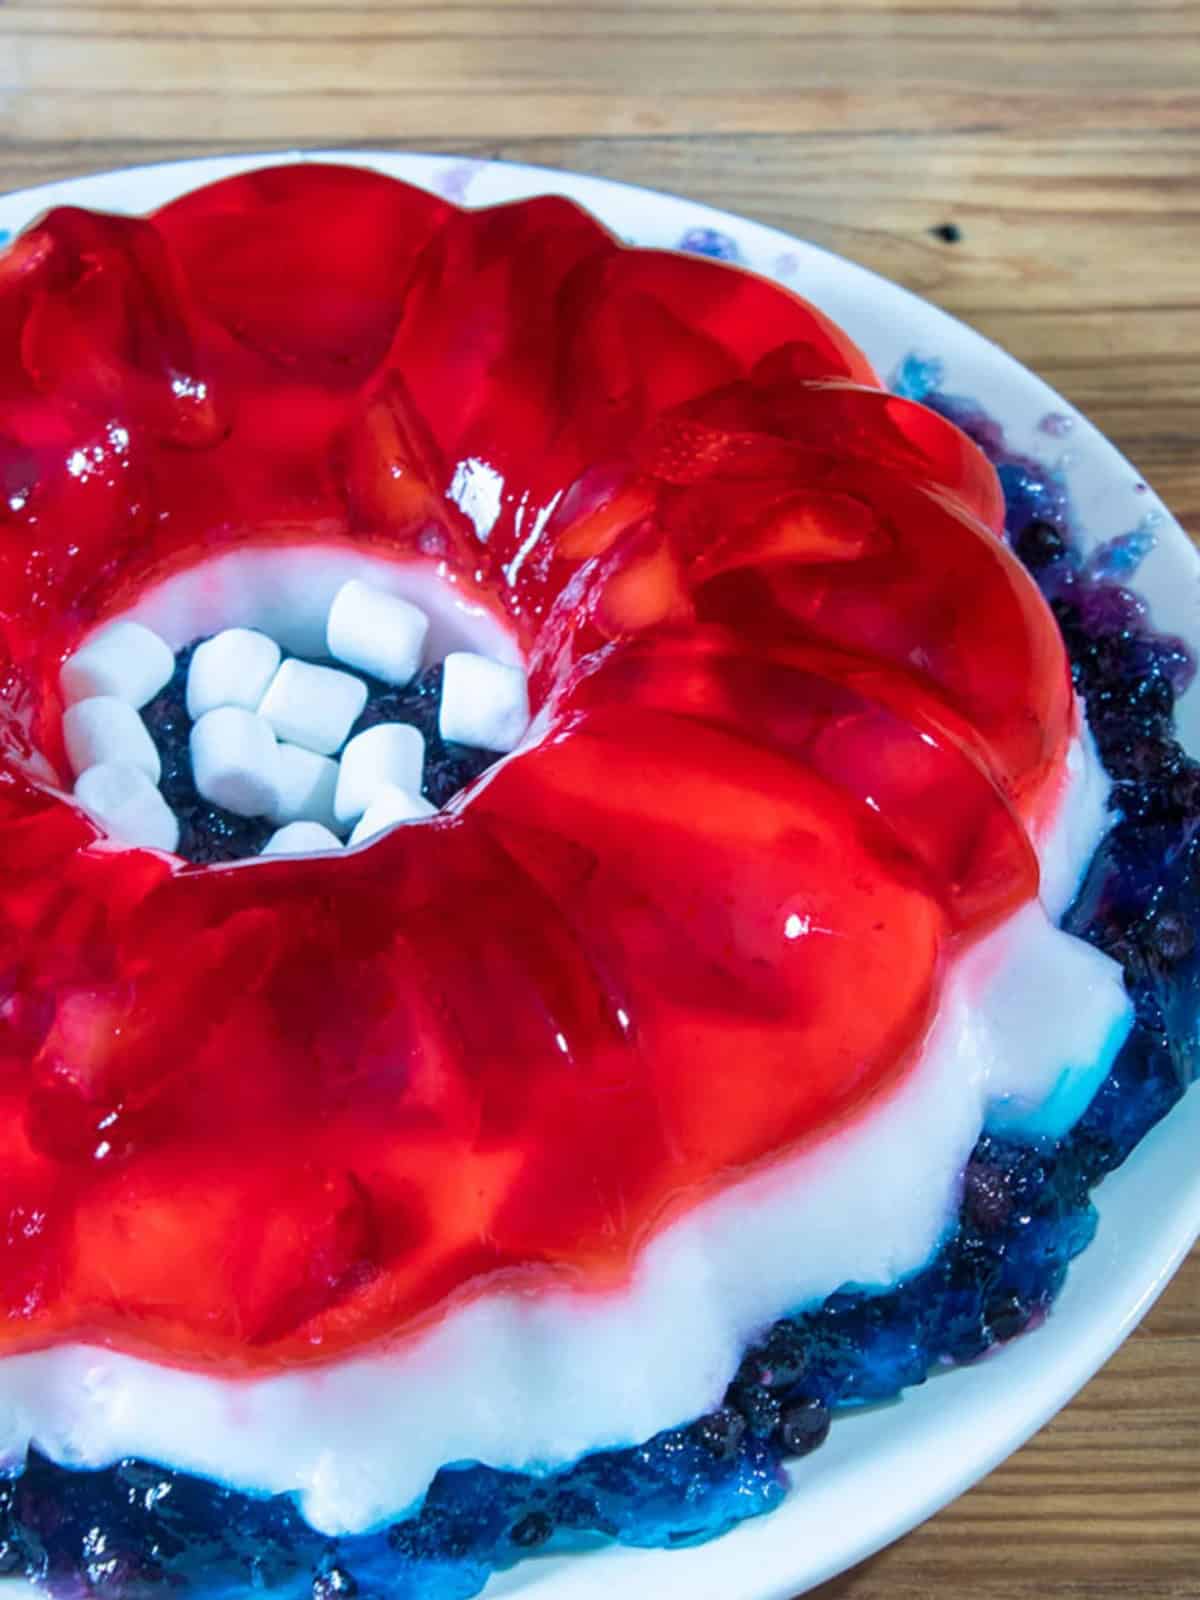 Jello salad mold in a plate with marshmallows in the center.